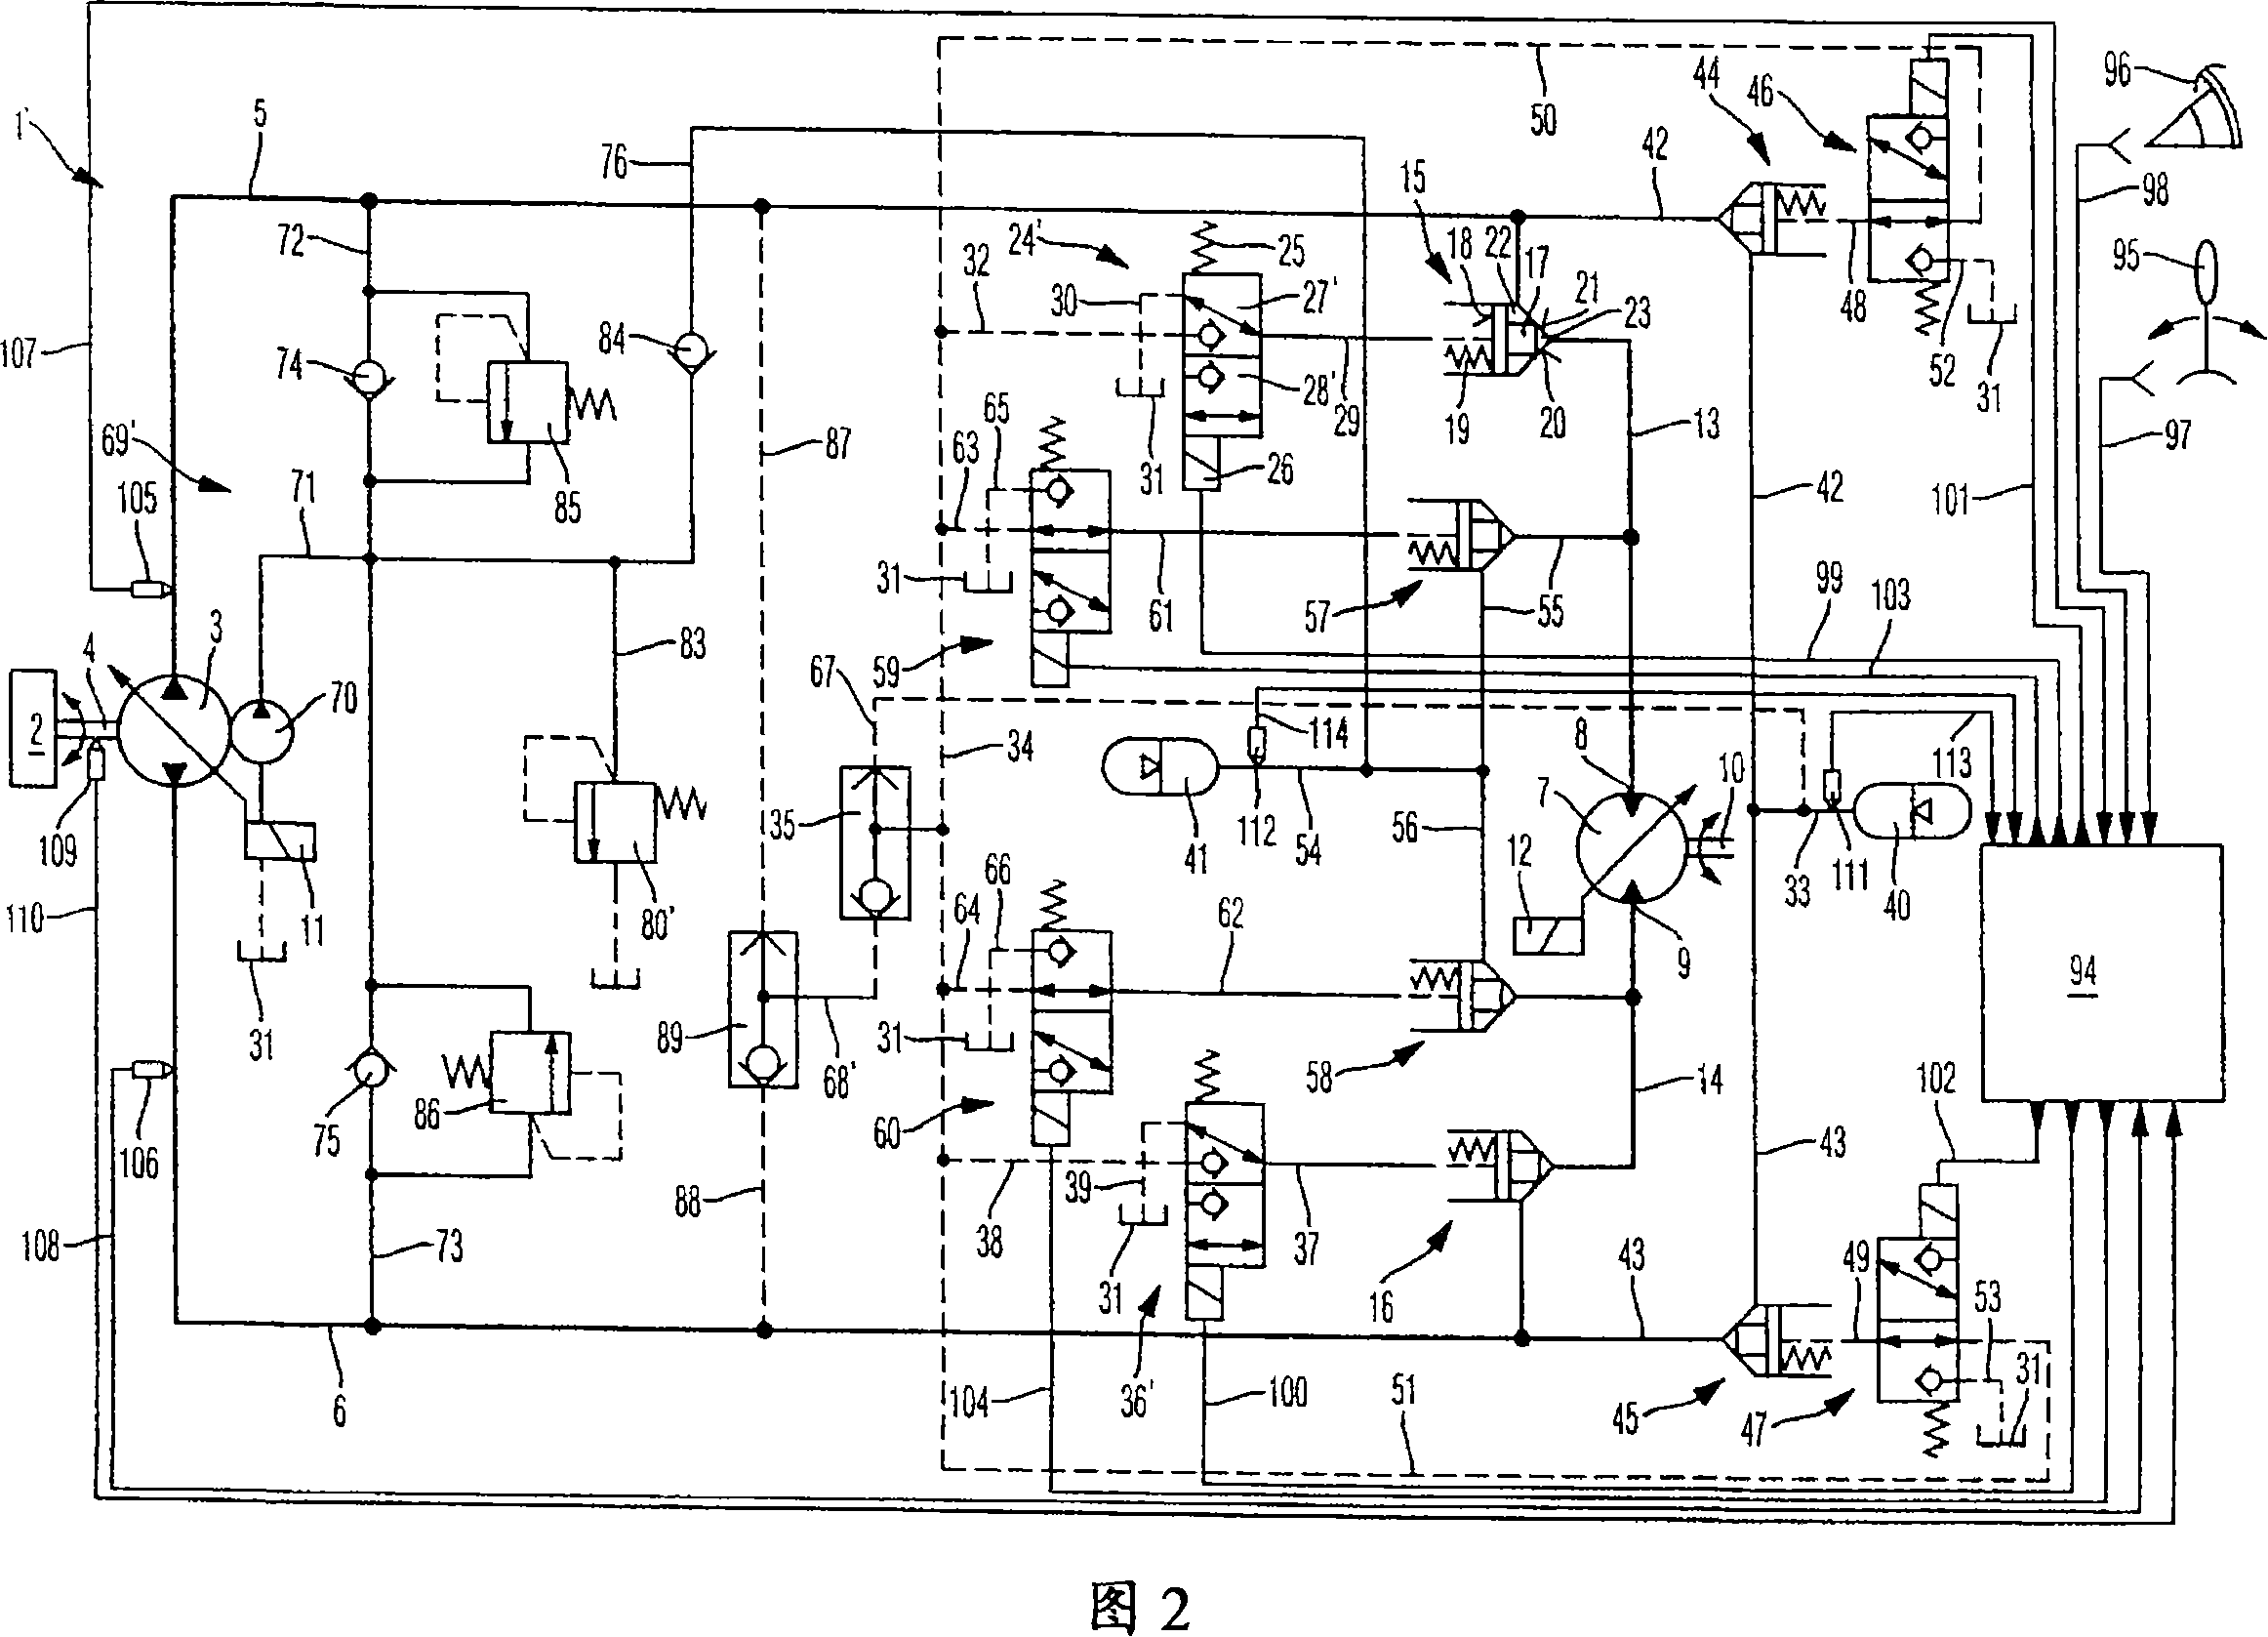 Method of controlling a hydrostatic drive